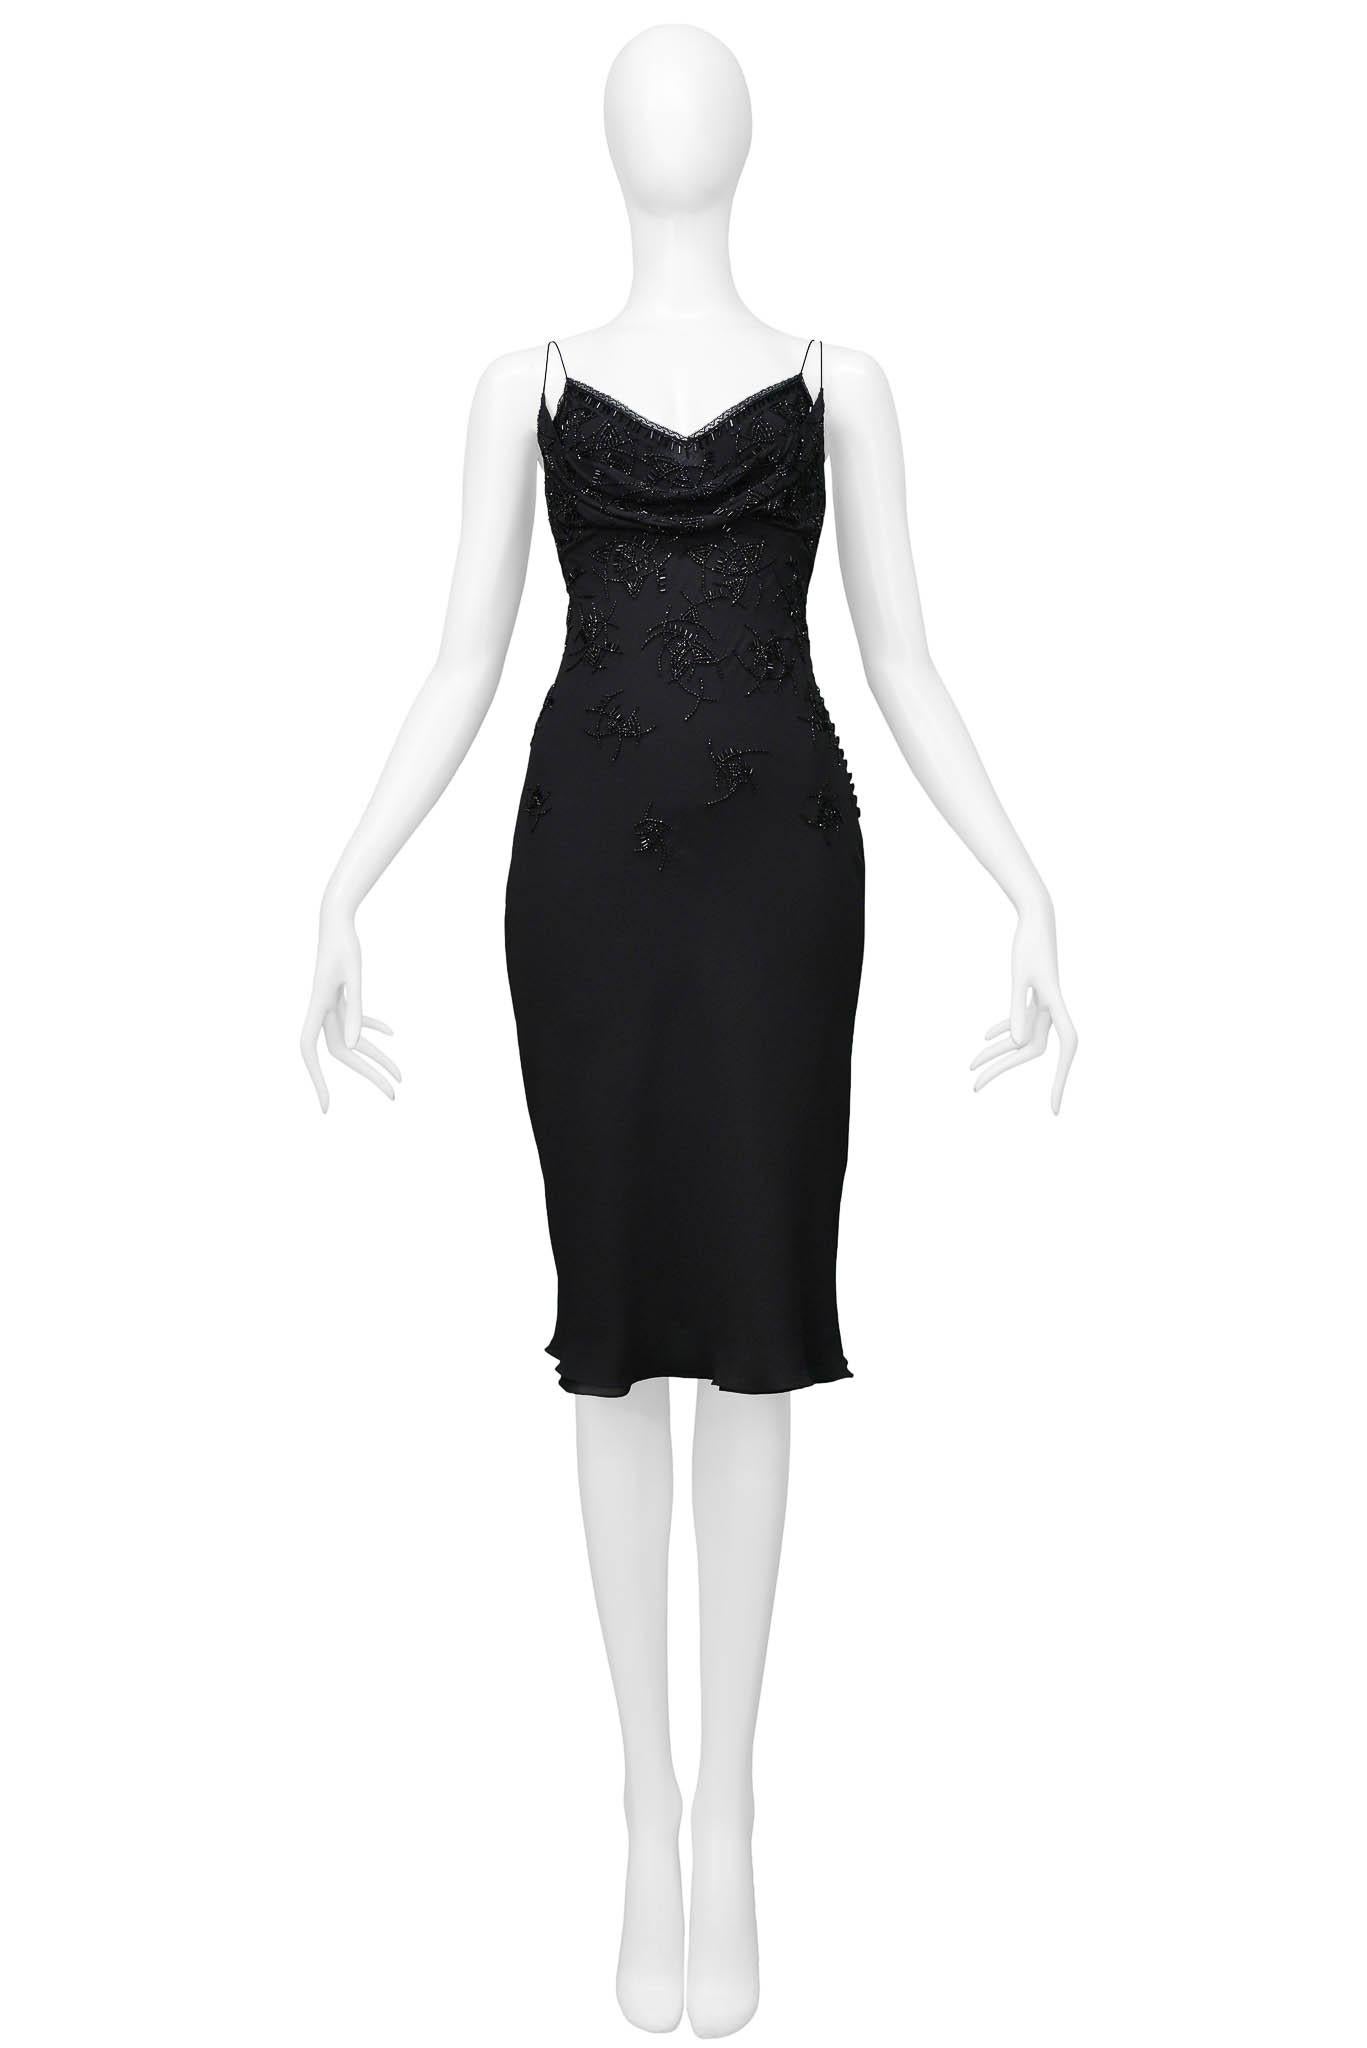 Resurrection Vintage is excited to offer a vintage Christian Dior black silk dress featuring beading all along the dress, multi-button closure down the side, lace trim on the top of the dress, and two shoulder straps on each side.

Christian